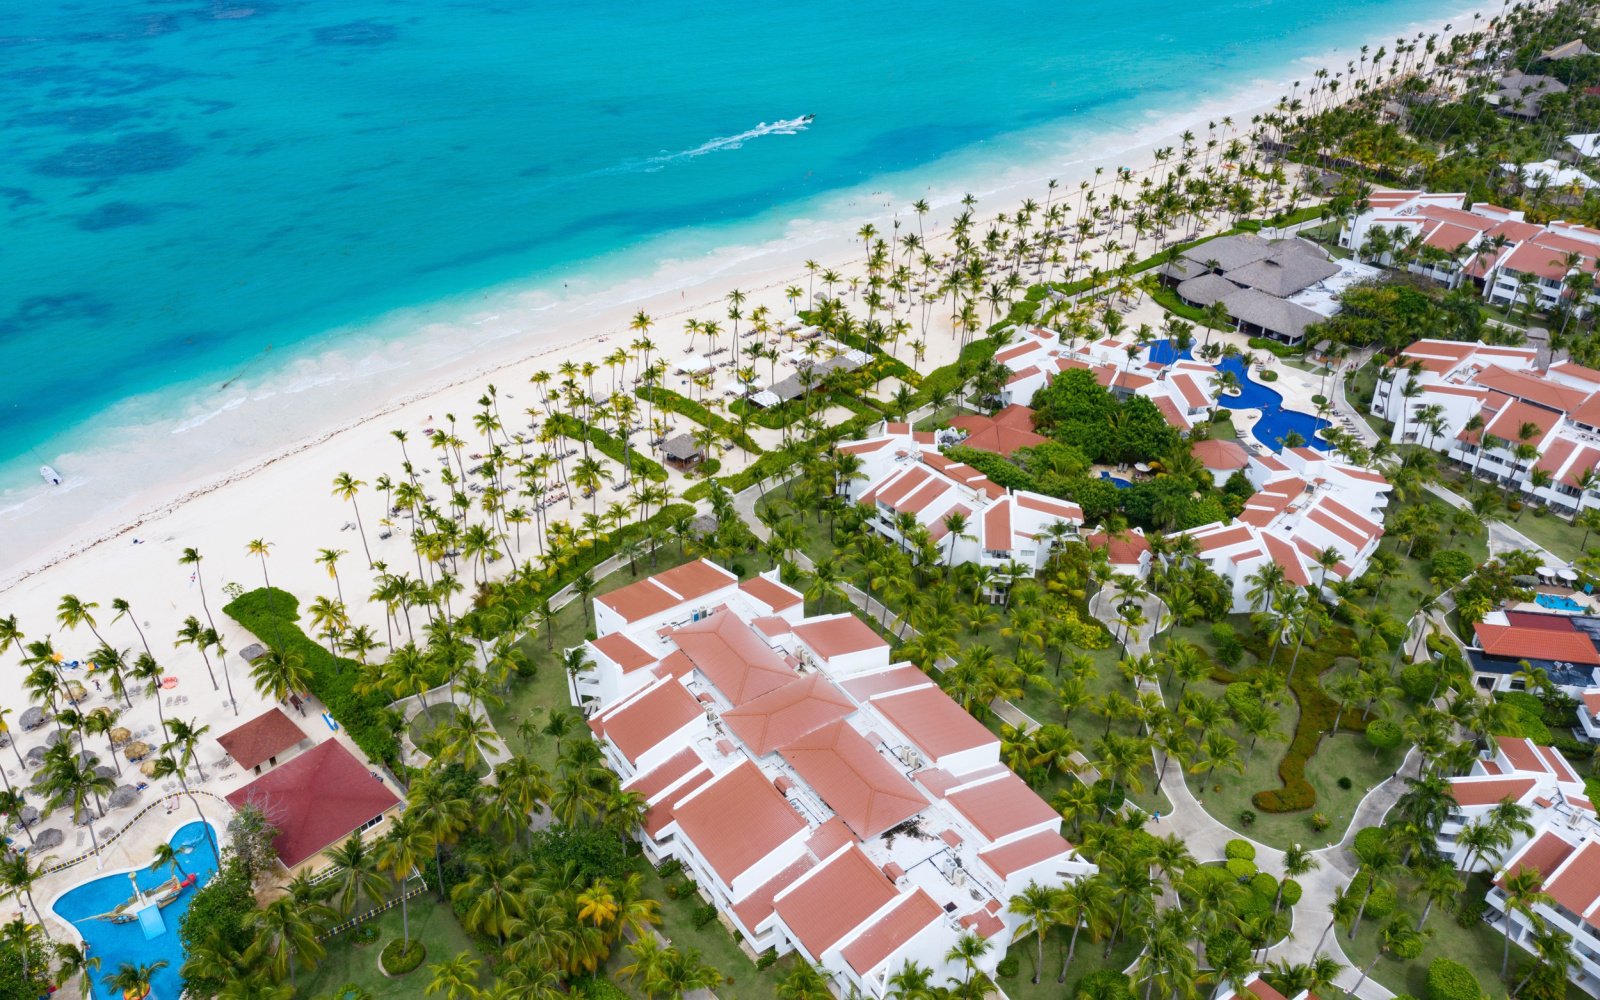 The 10 Best All-Inclusive Resorts in Punta Cana in 2023